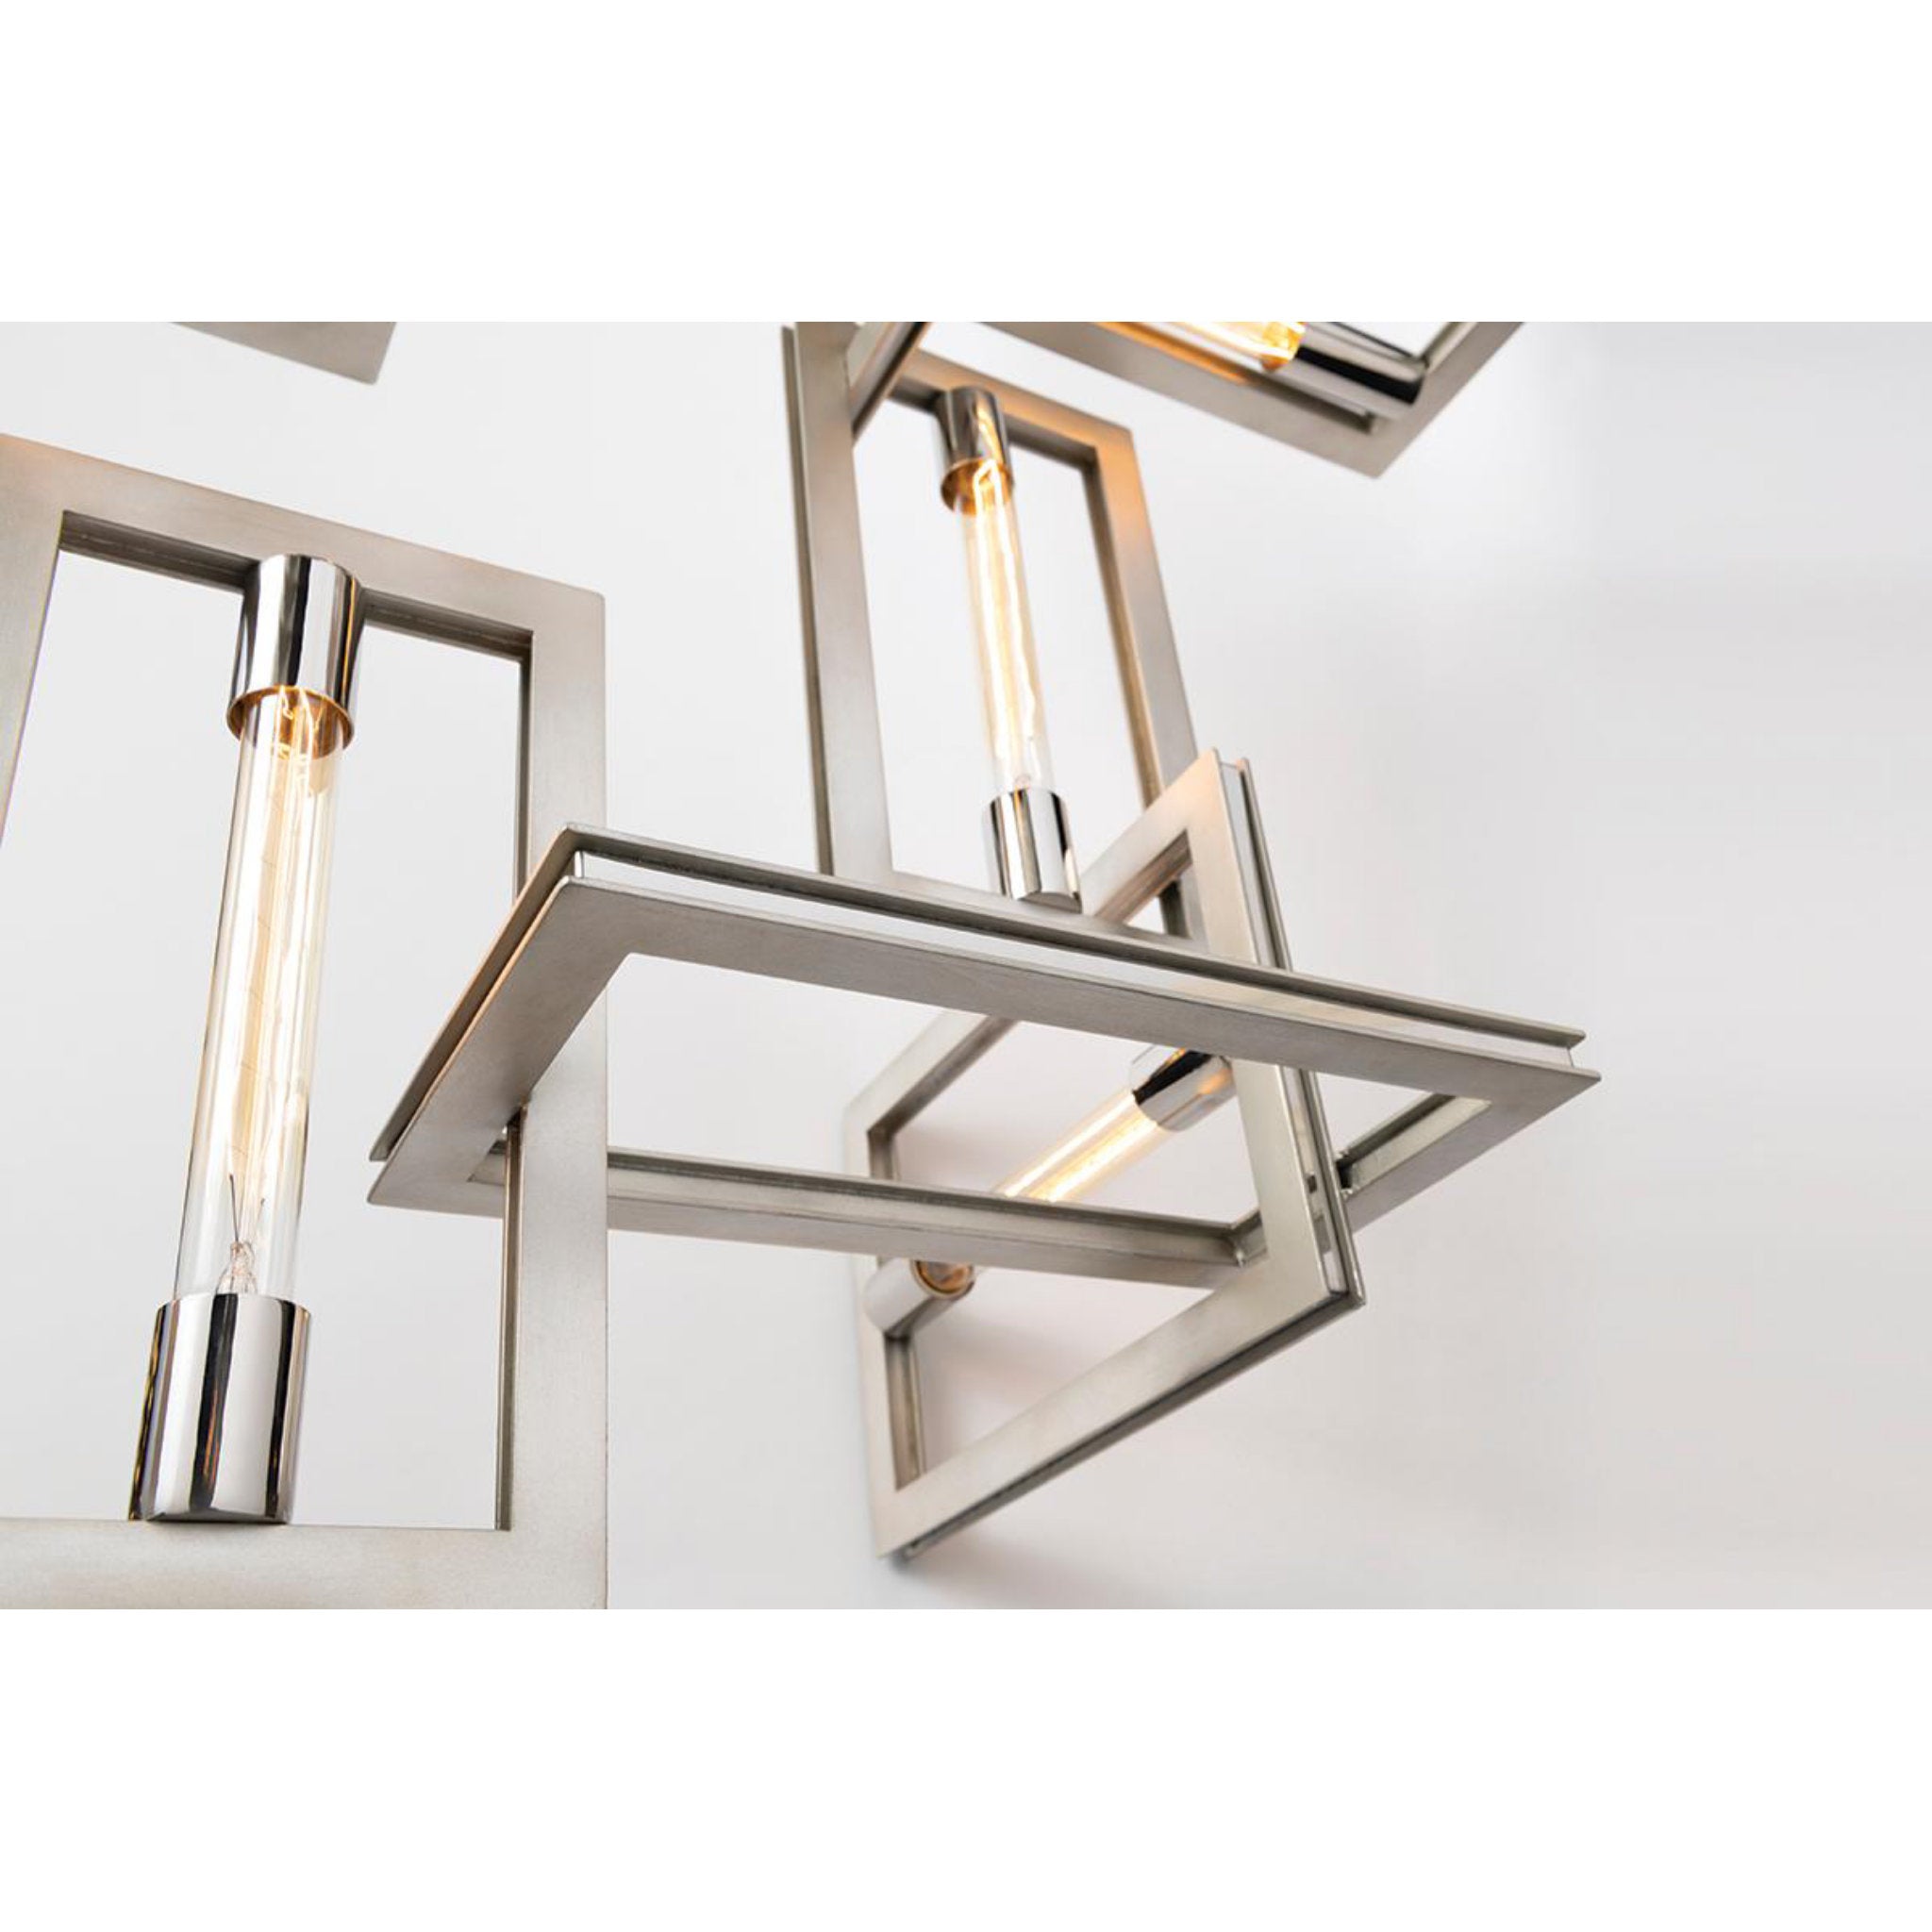 Enigma 9 Light Chandelier in Bronze With Polished Stainless